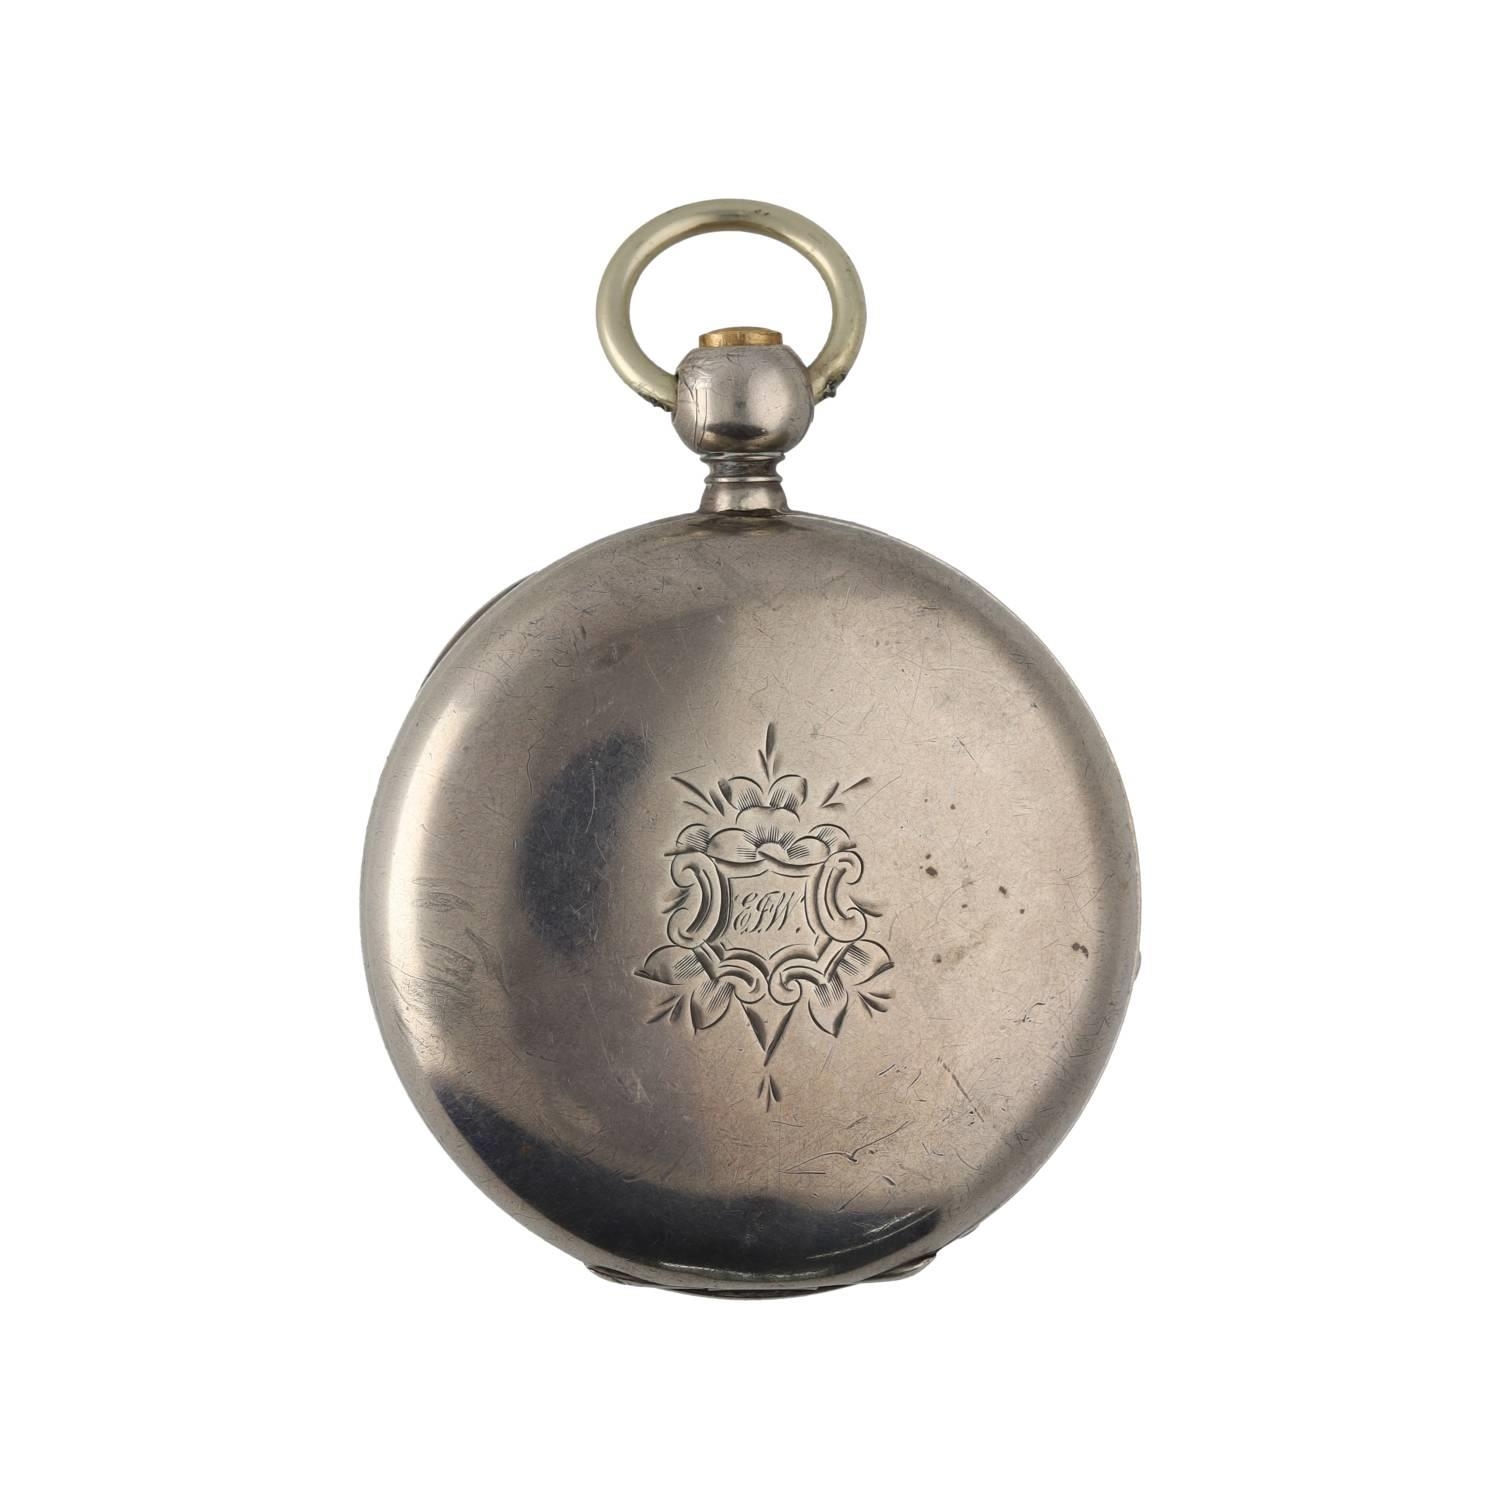 Early American Waltham 'P.S. Bartlett' lever hunter pocket watch, circa 1864, serial no. 148734, - Image 4 of 5